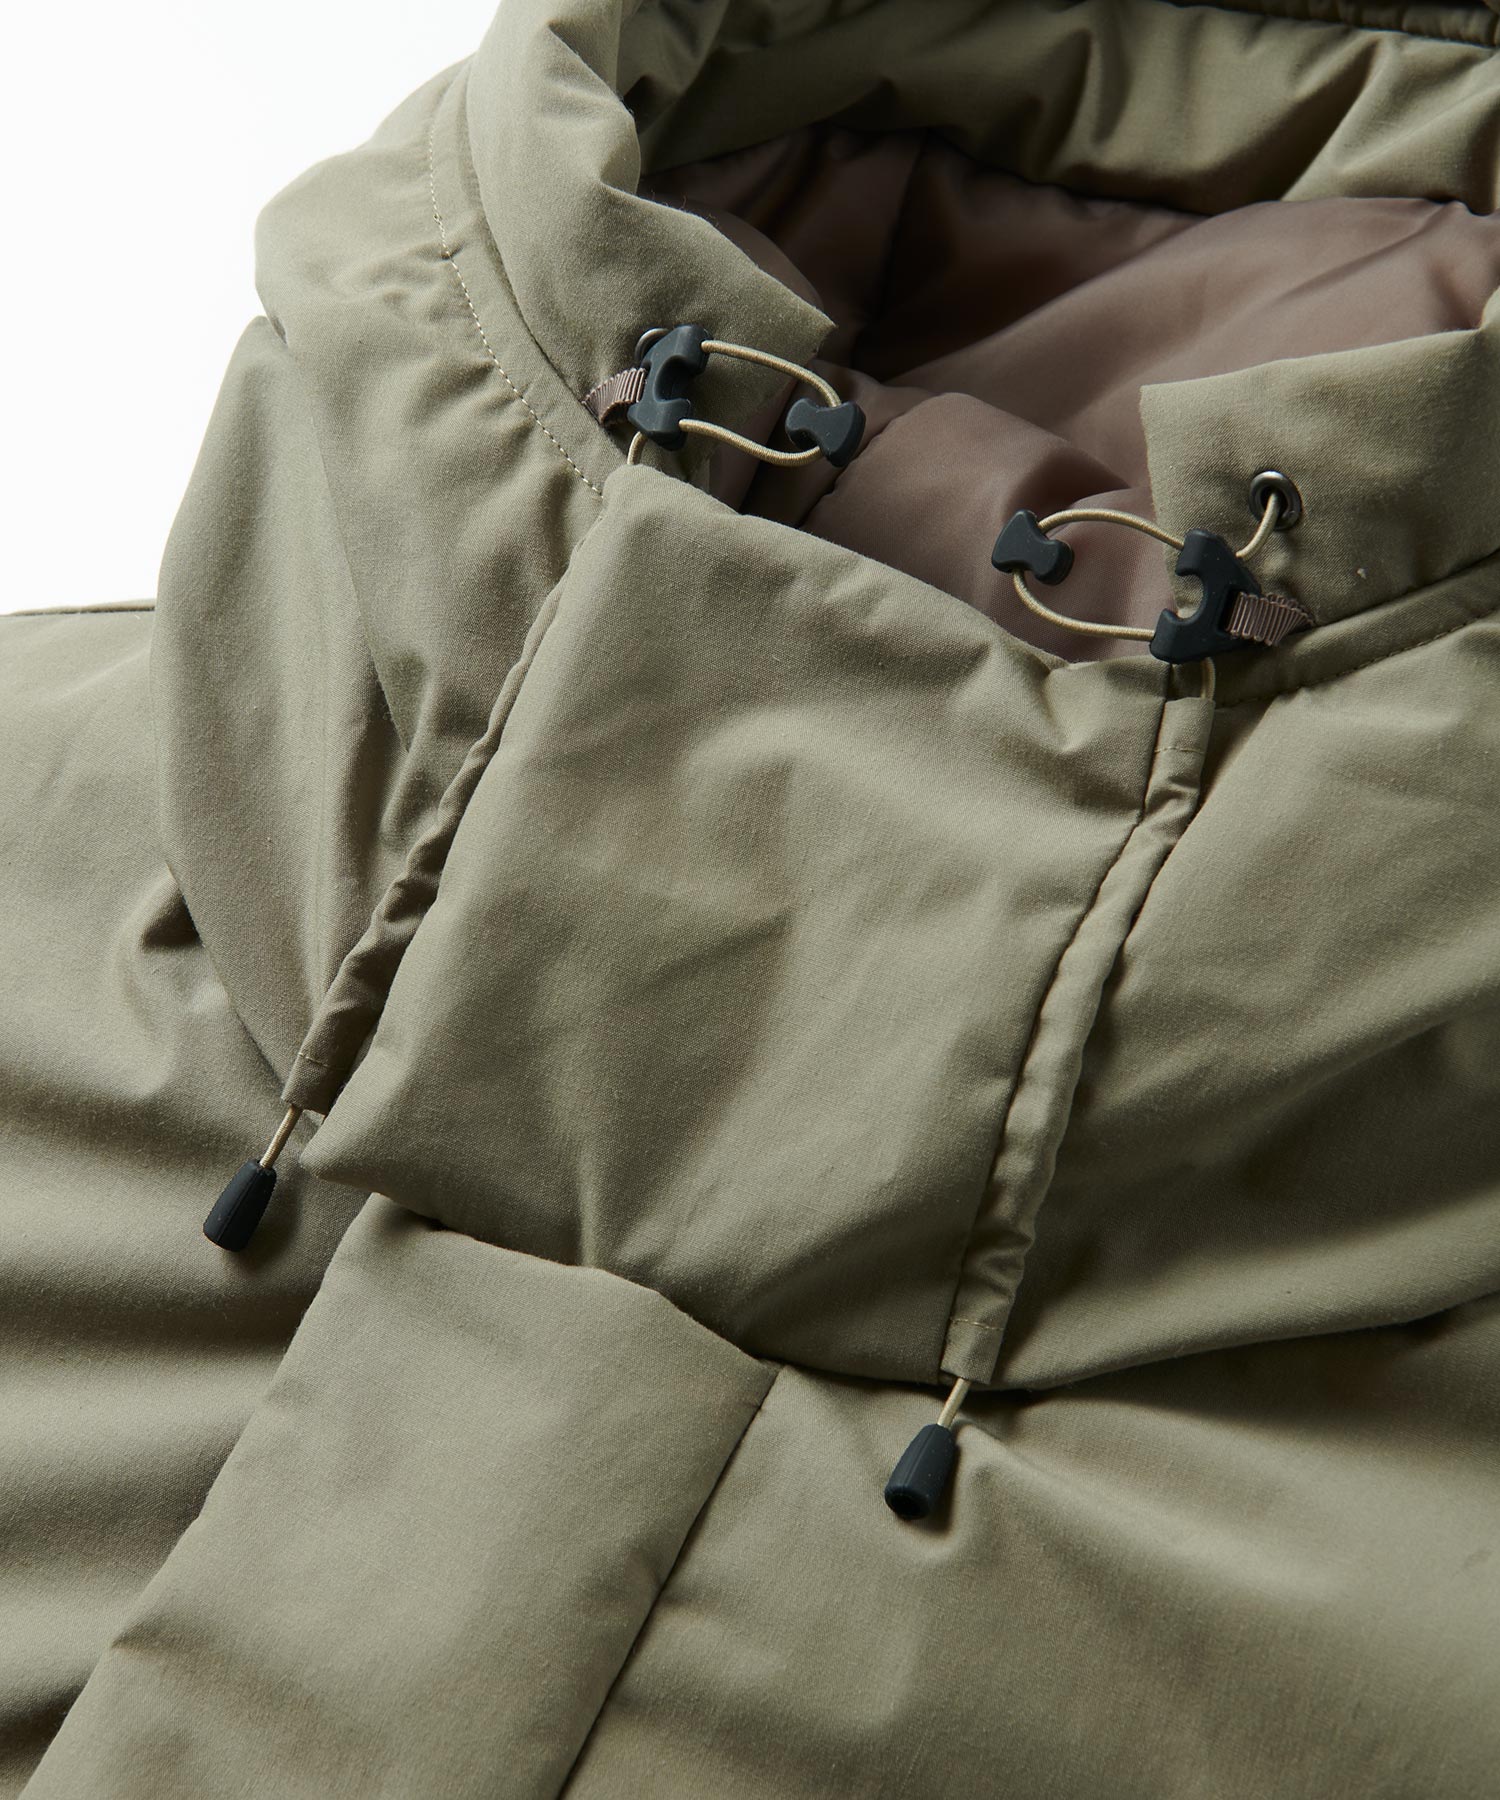 Gramicci by F/CE. INSULATION JACKET